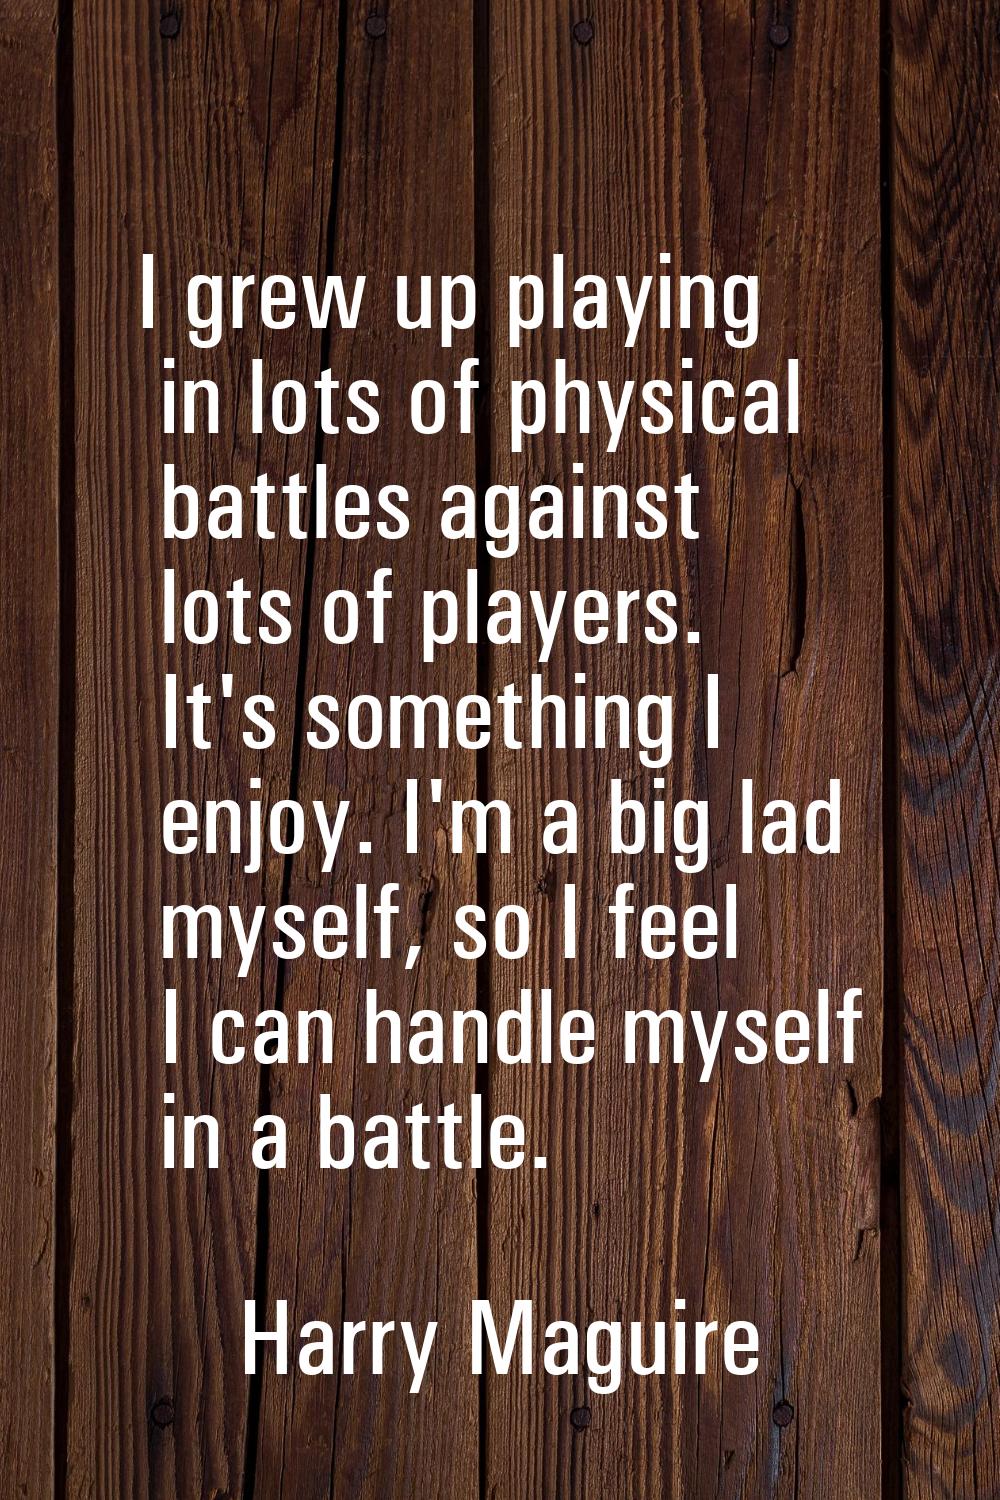 I grew up playing in lots of physical battles against lots of players. It's something I enjoy. I'm 